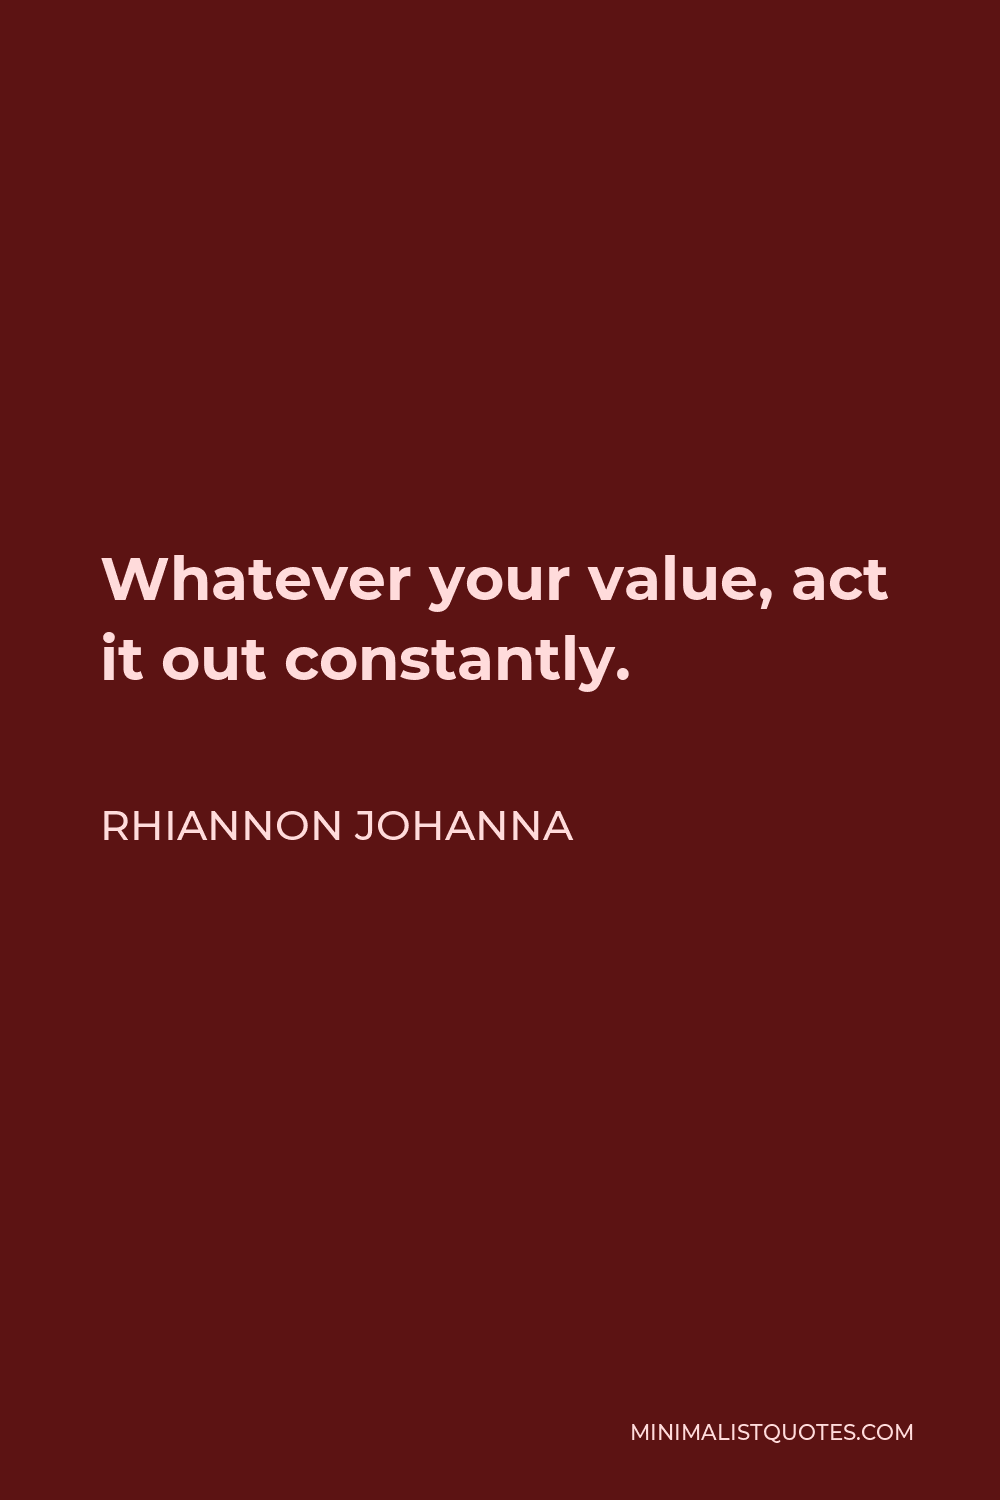 Rhiannon Johanna Quote - Whatever your value, act it out constantly.